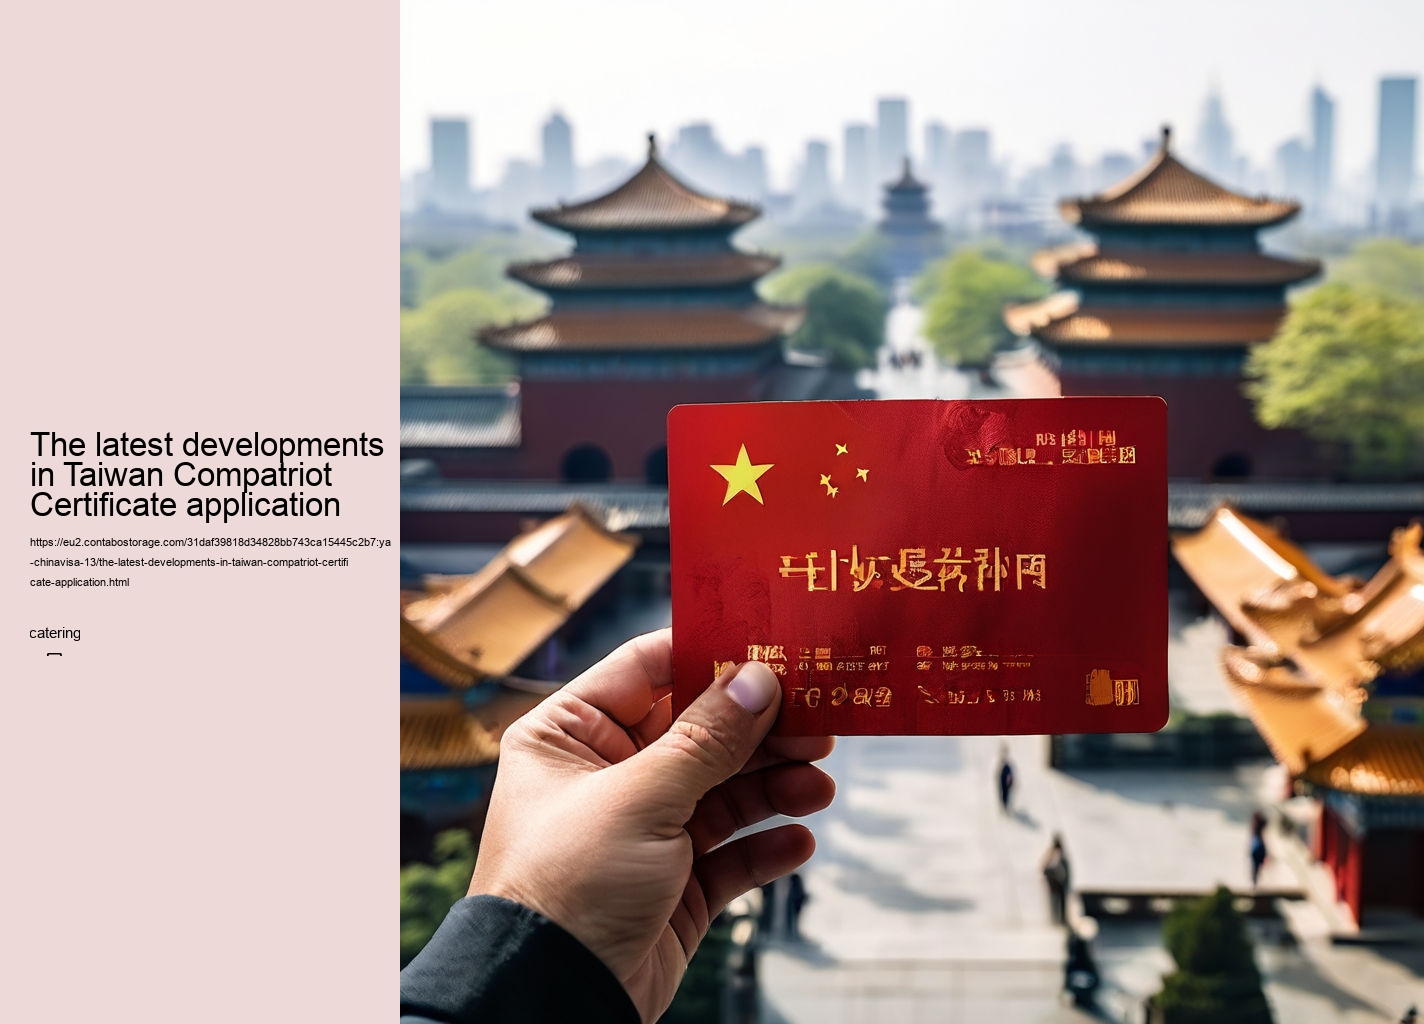 The latest developments in Taiwan Compatriot Certificate application